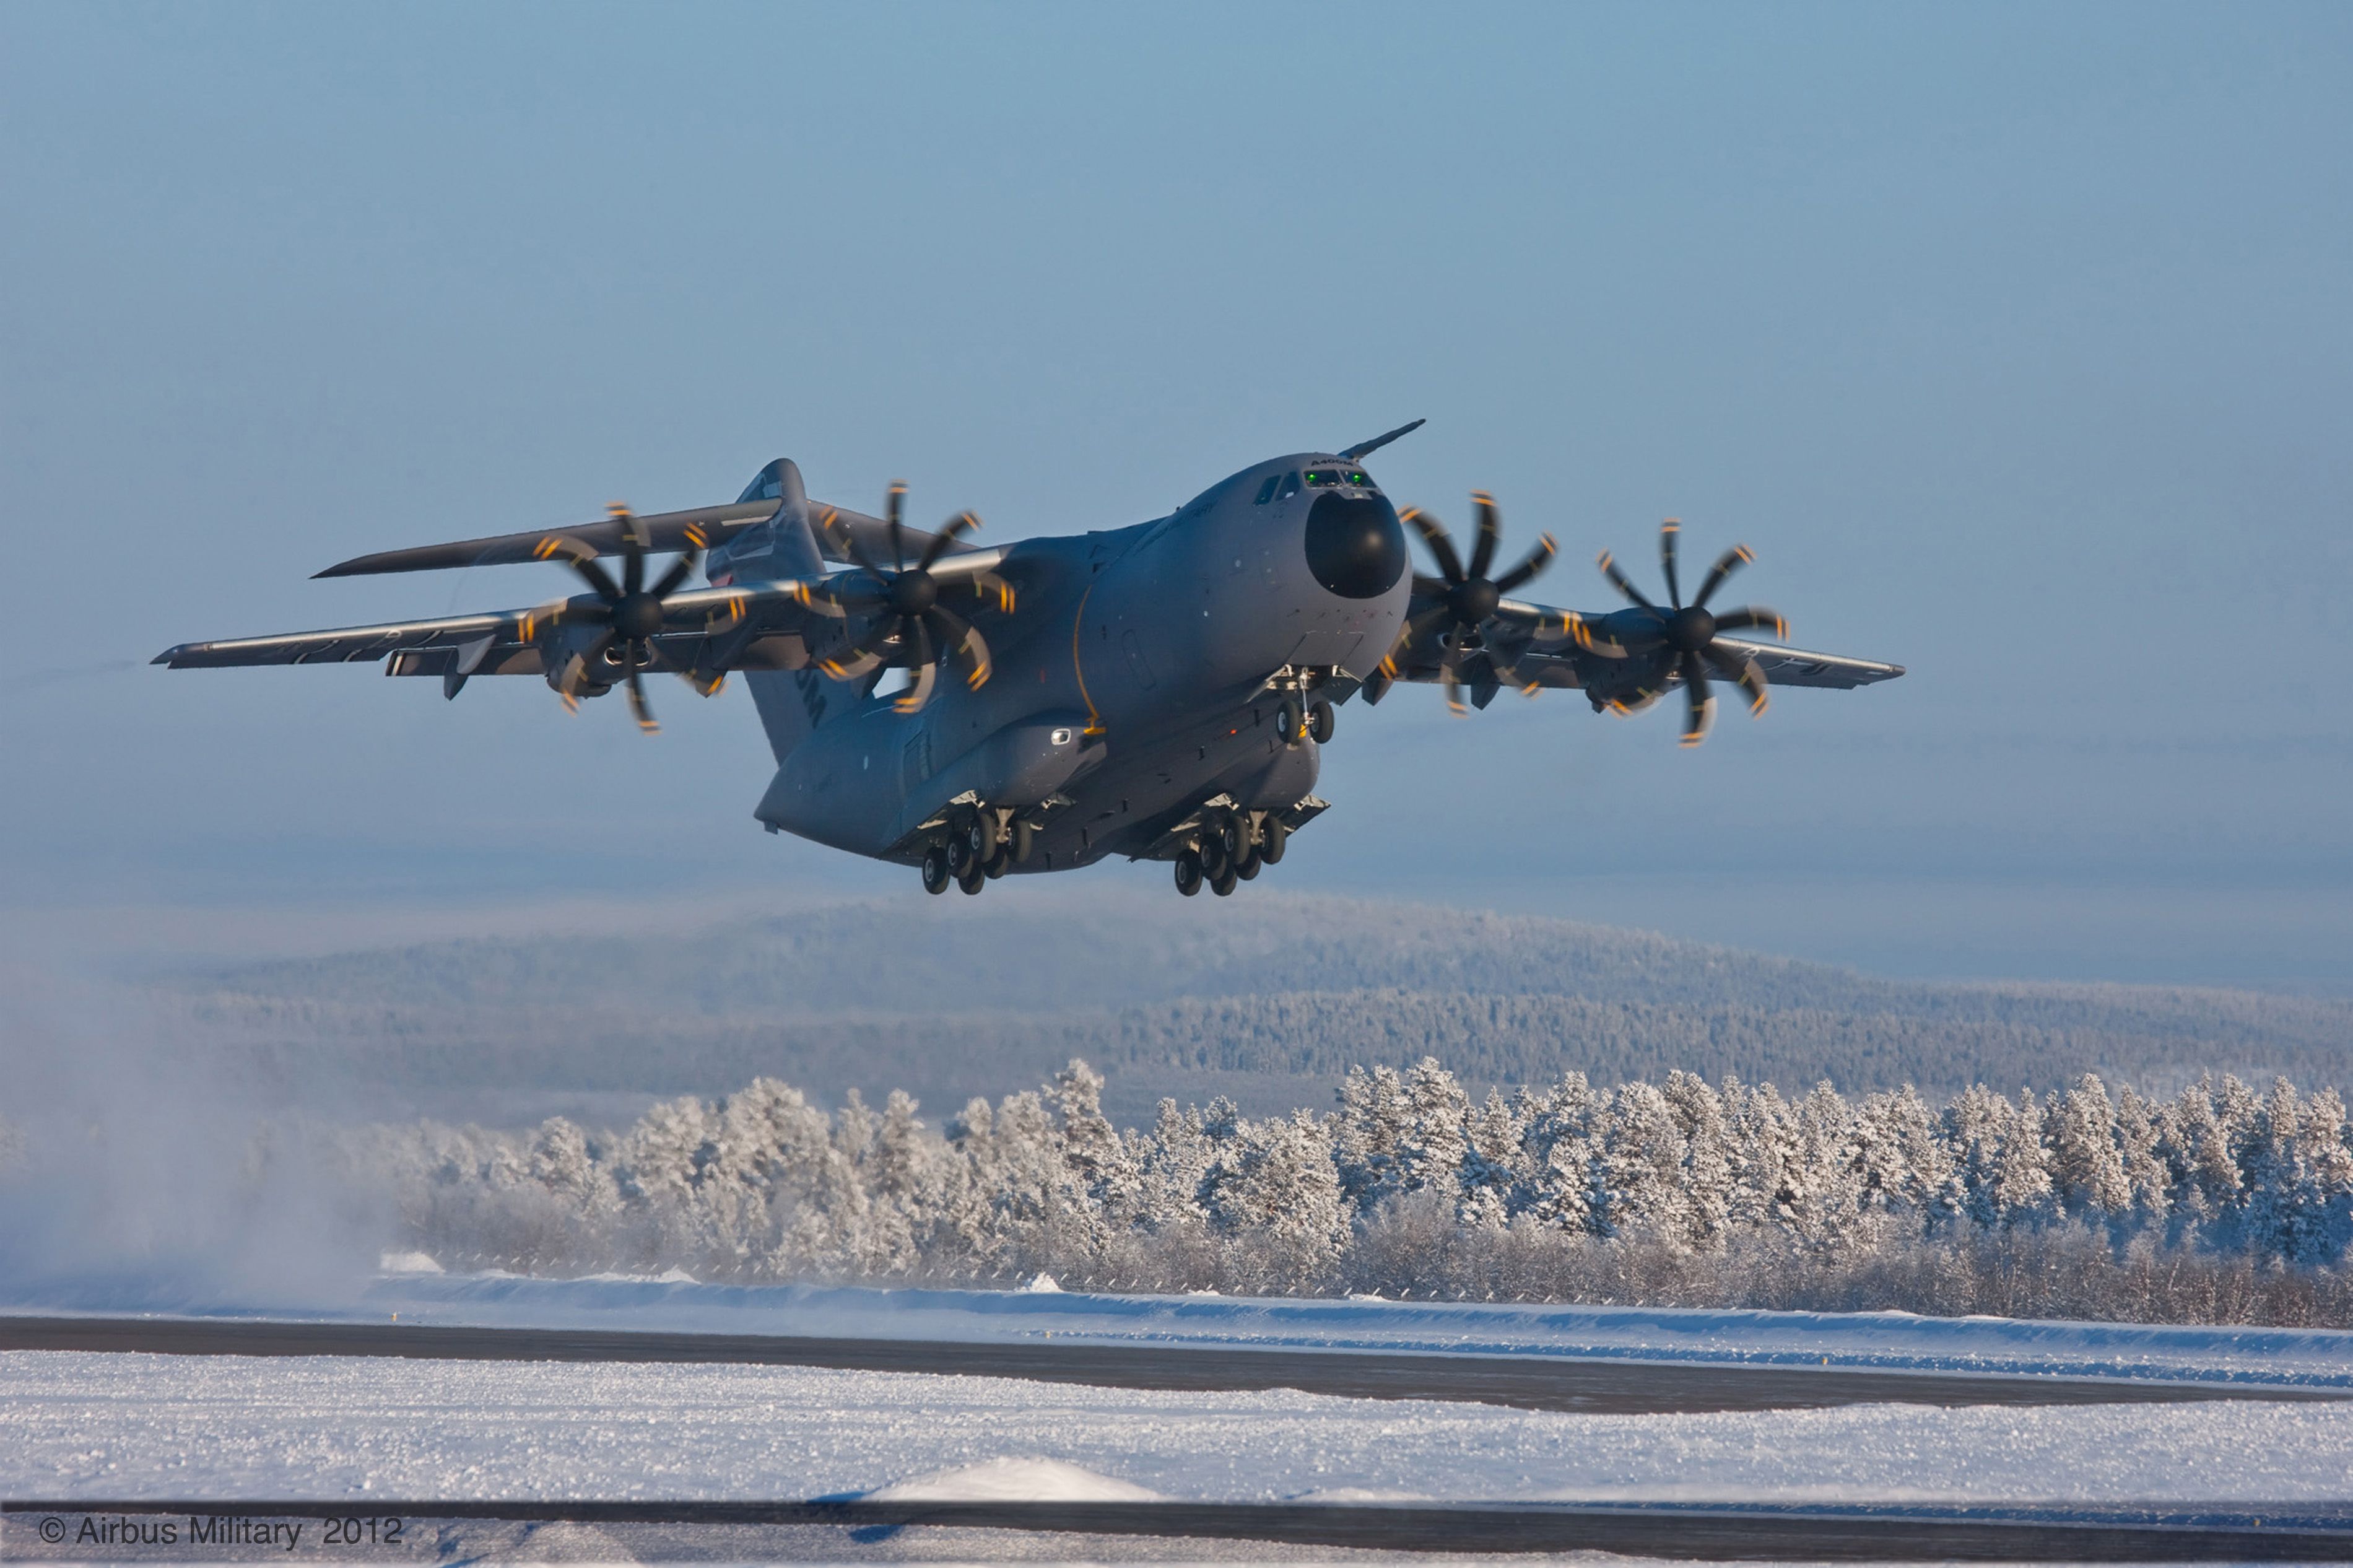 Free download Airbus A400M Wallpaper and Background Image stmednet [3800x2532] for your Desktop, Mobile & Tablet. Explore Airbus Wallpaper. Airbus Wallpaper, Airbus Wallpaper, Airbus A350 Wallpaper